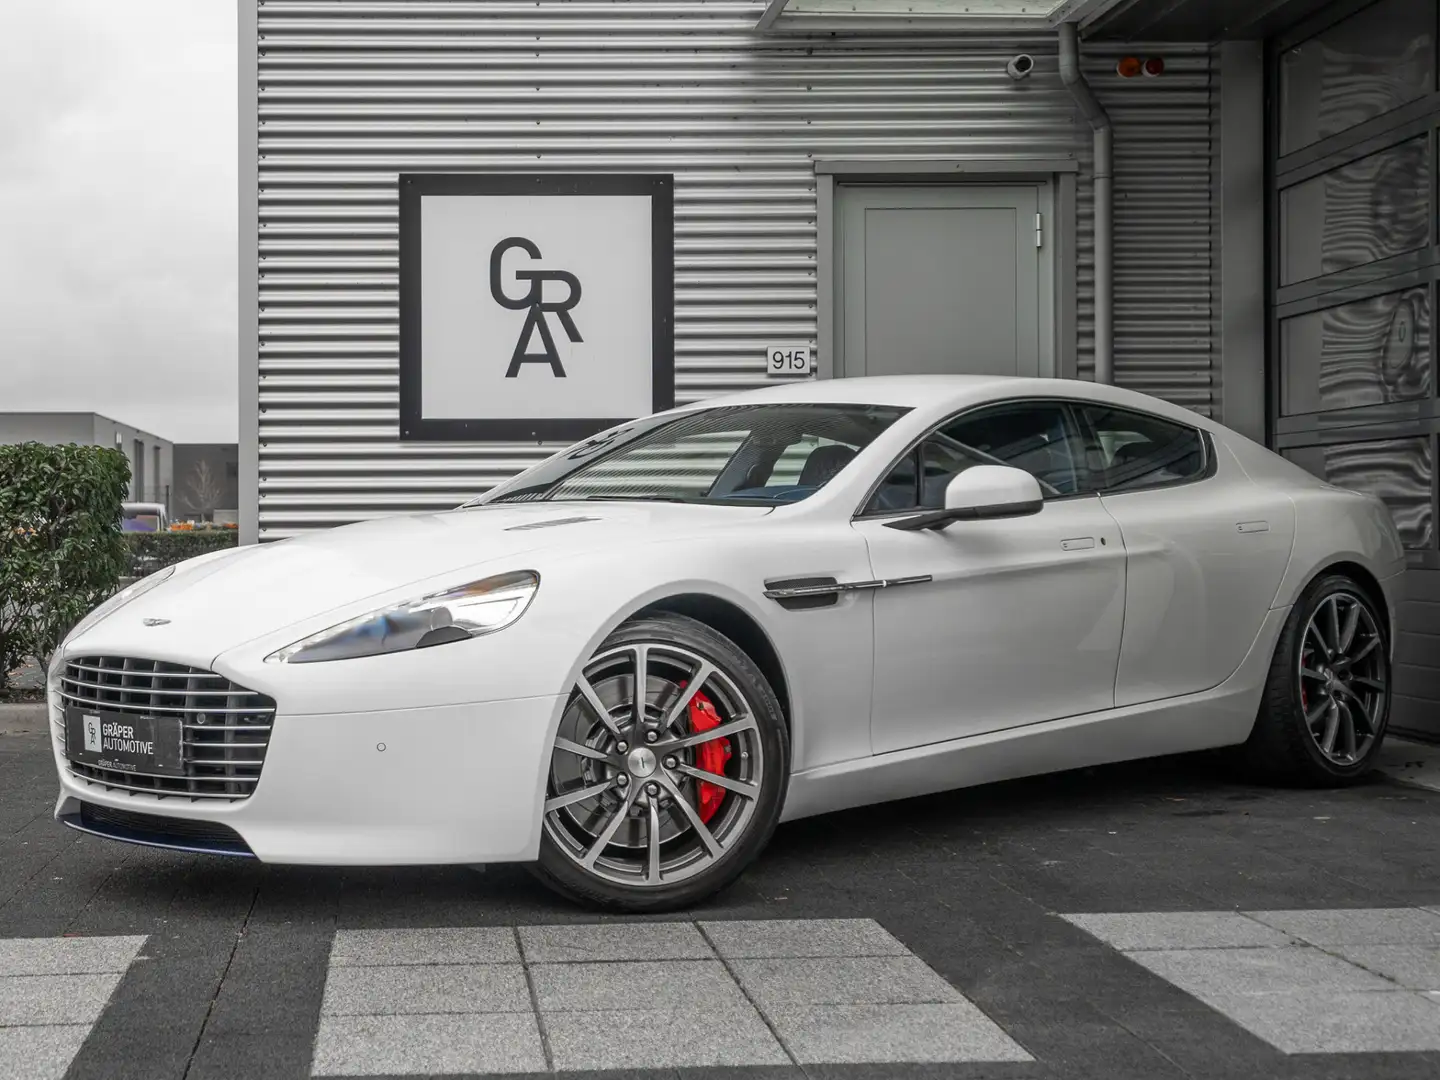 Aston Martin Rapide S 6.0 V12 ‘Britain is Great’ Edition by Q 1/8 Blanc - 2